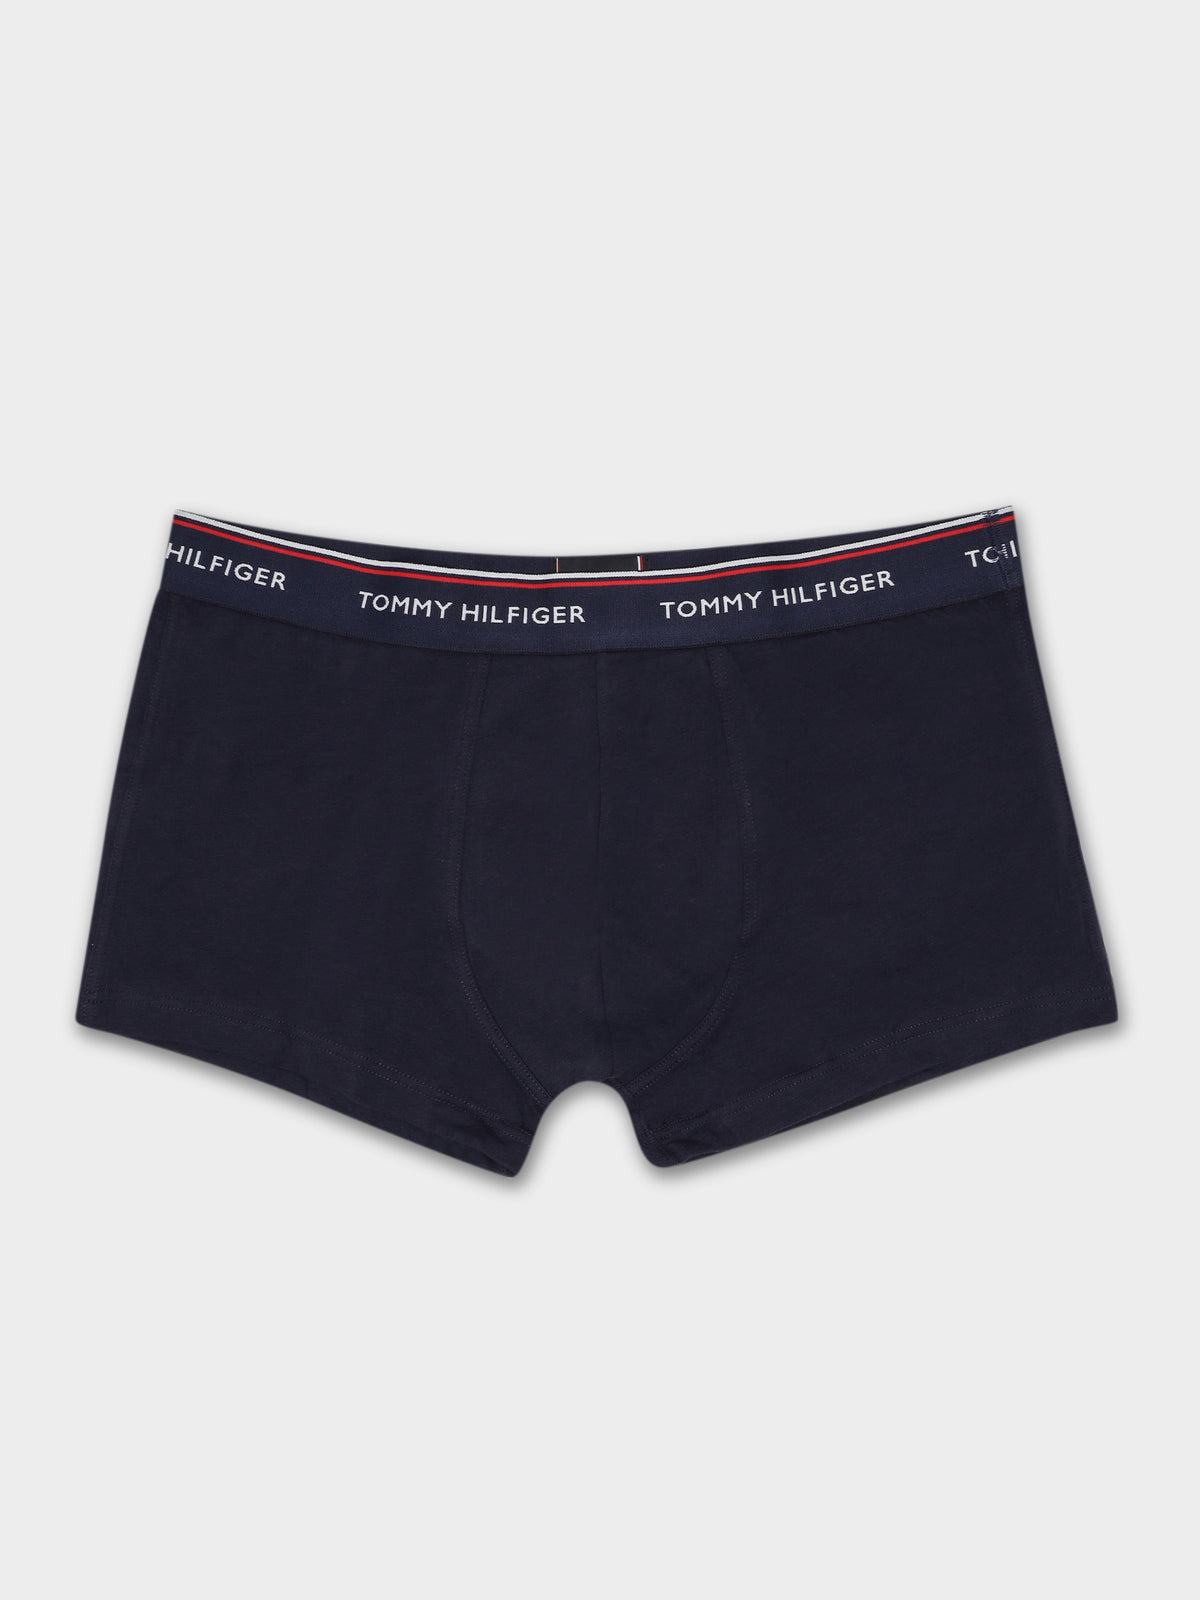 3 Pairs of Low Rise Boxer Briefs in Navy